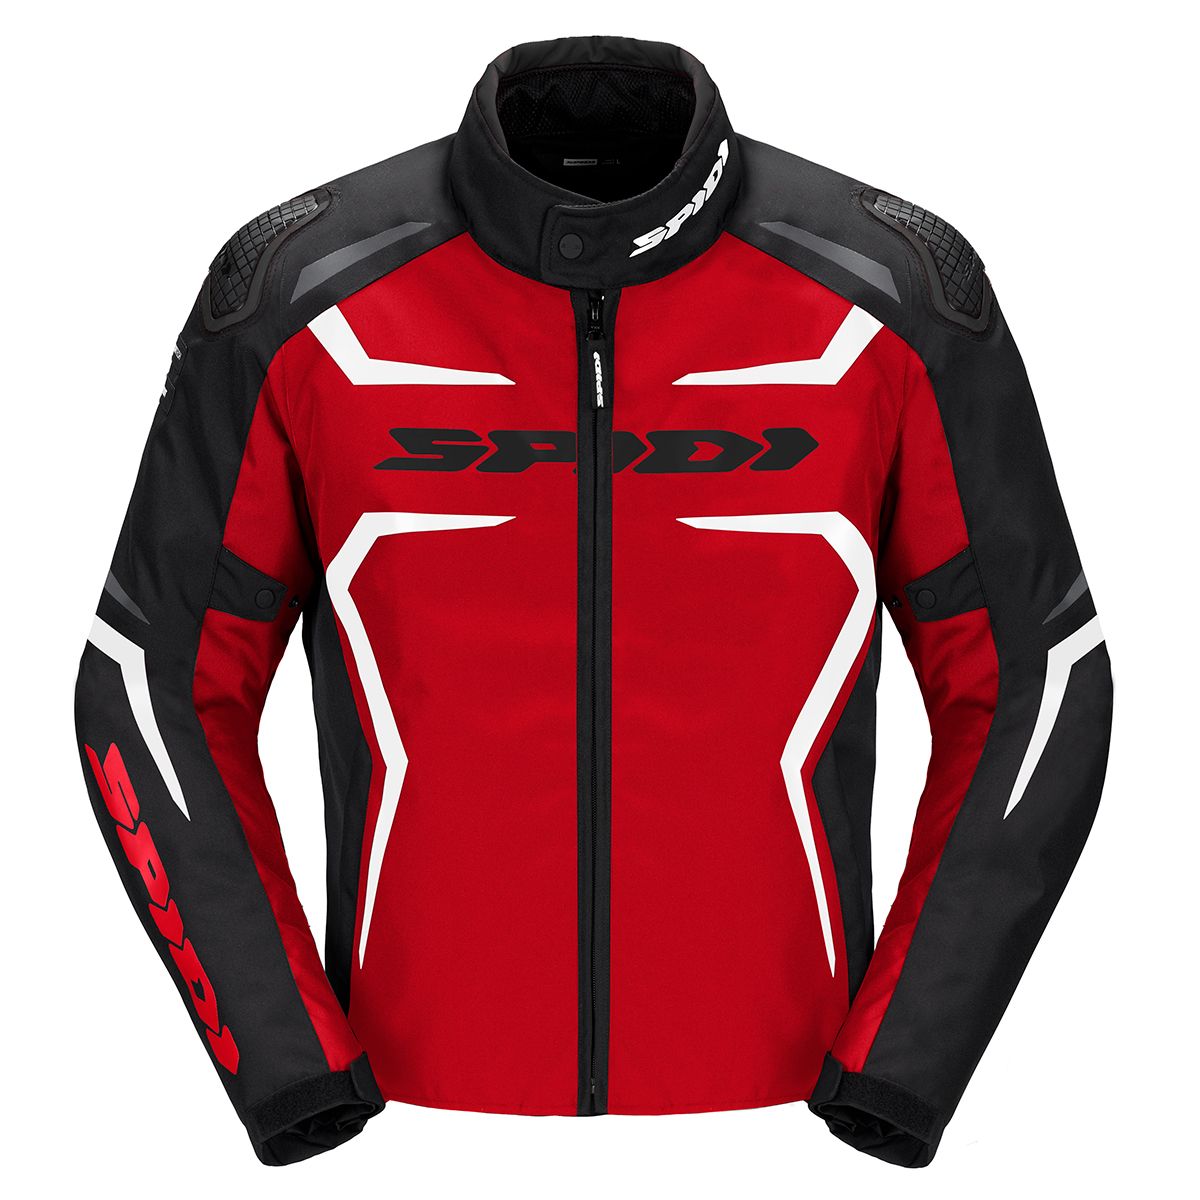 Image of Spidi Race Evo H2Out Jacket Black Red White Size 3XL ID 8030161475463